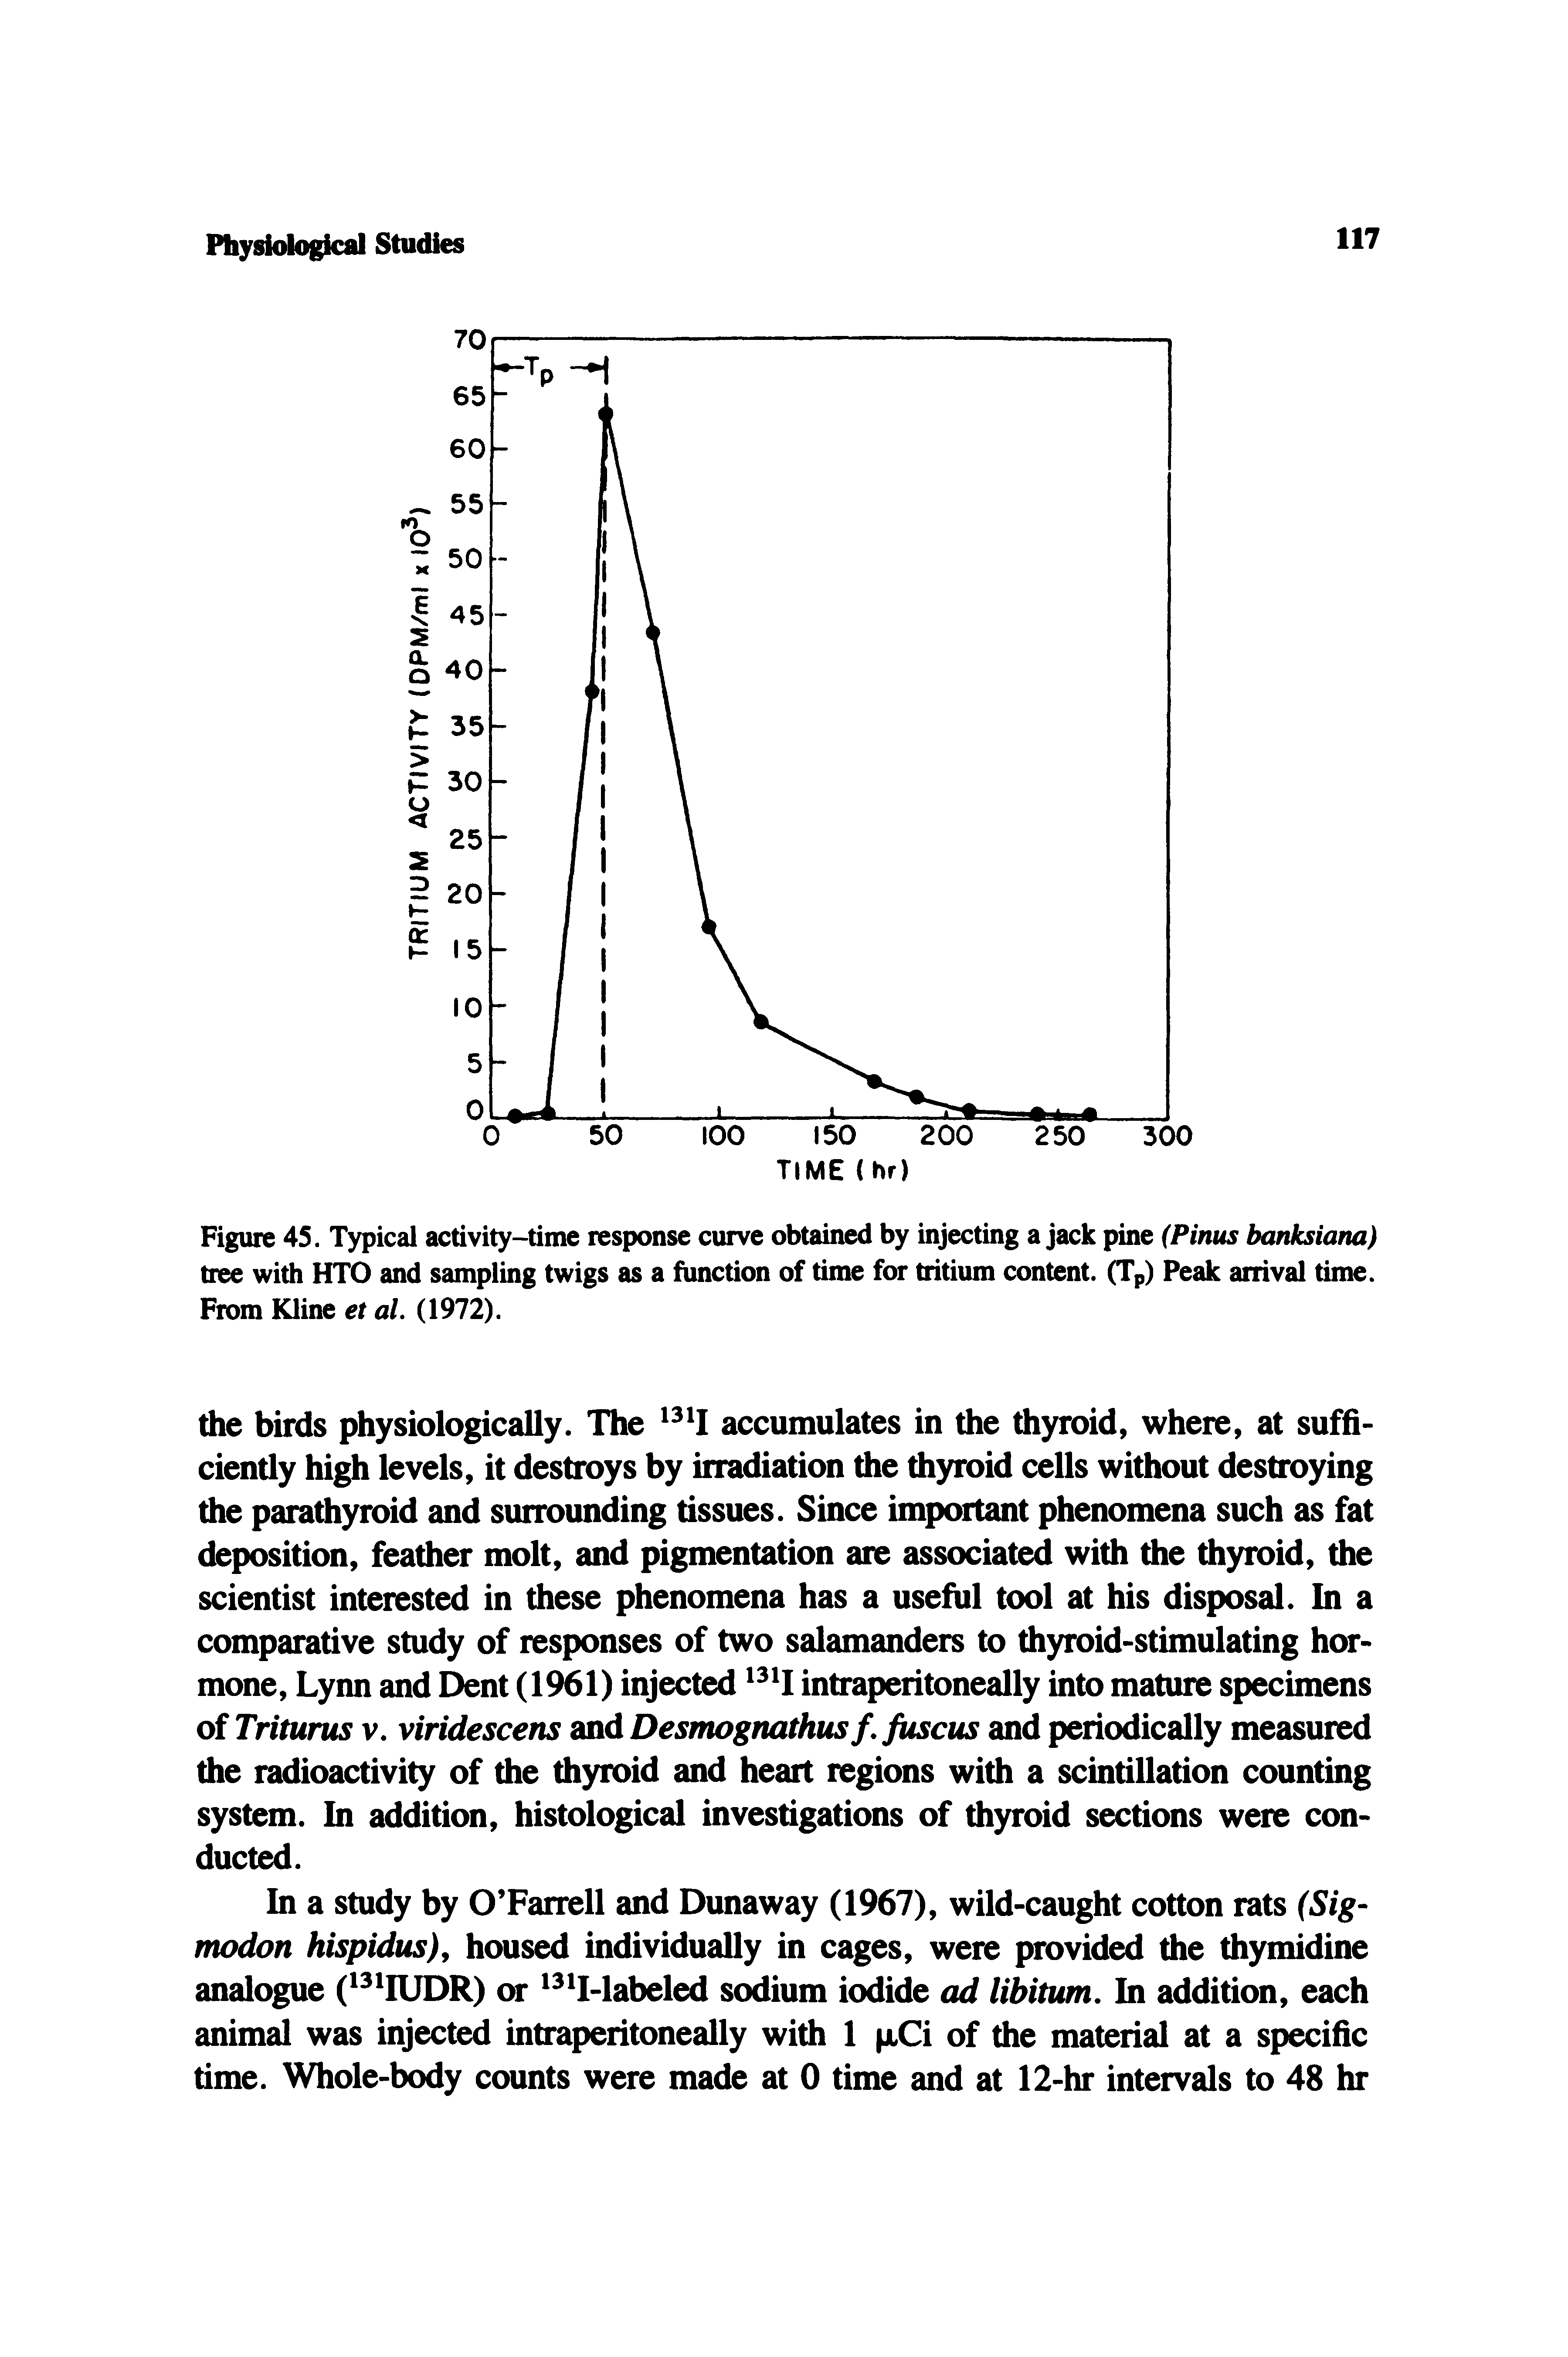 Figure 45. Typical activity-time response curve obtained by injecting a jack pine (Pinus banksiana) tree with HTO and sampling twigs as a function of time for tritium content. (Tp) Peak arrival time. From Kline et al. (1972).